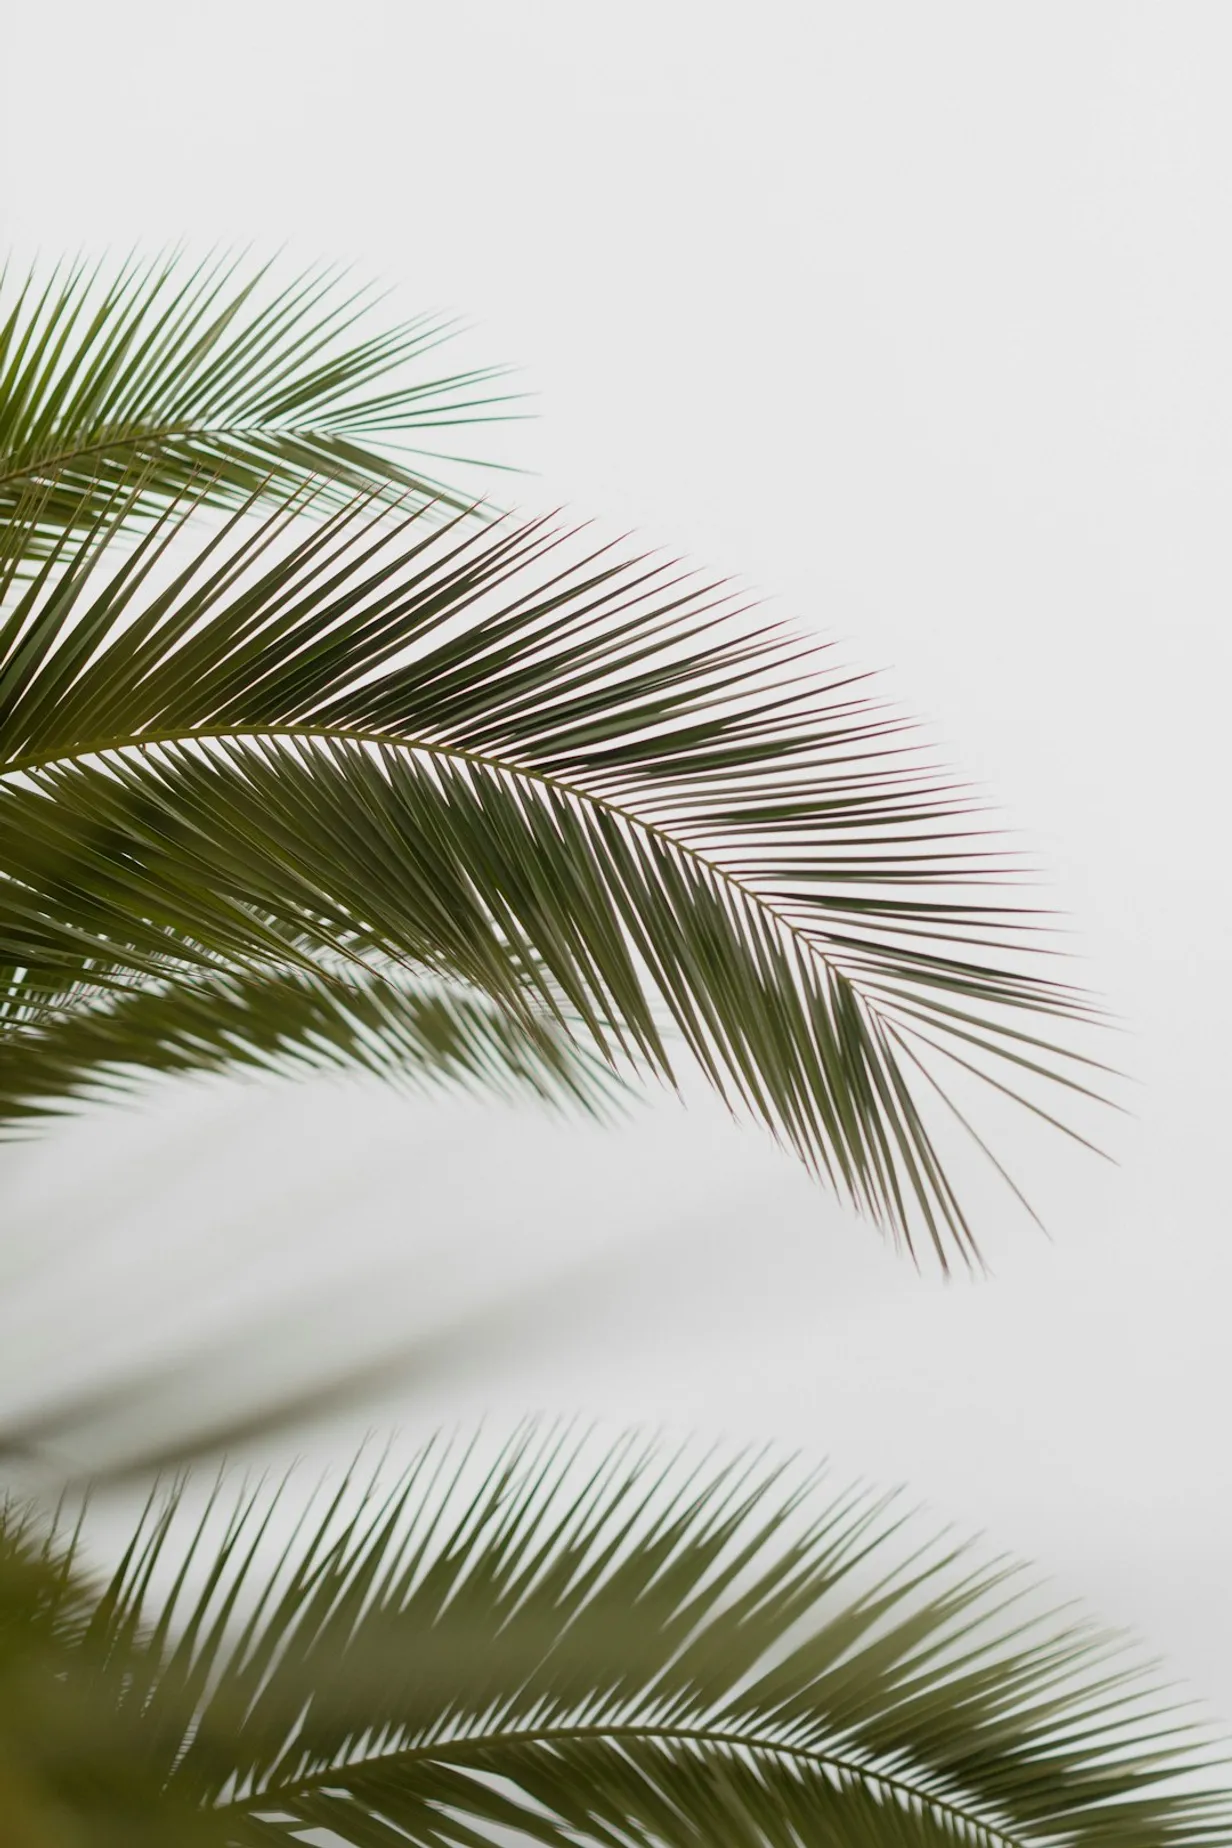 How to Use Artificial Palm Trees in Your HomeIllustration